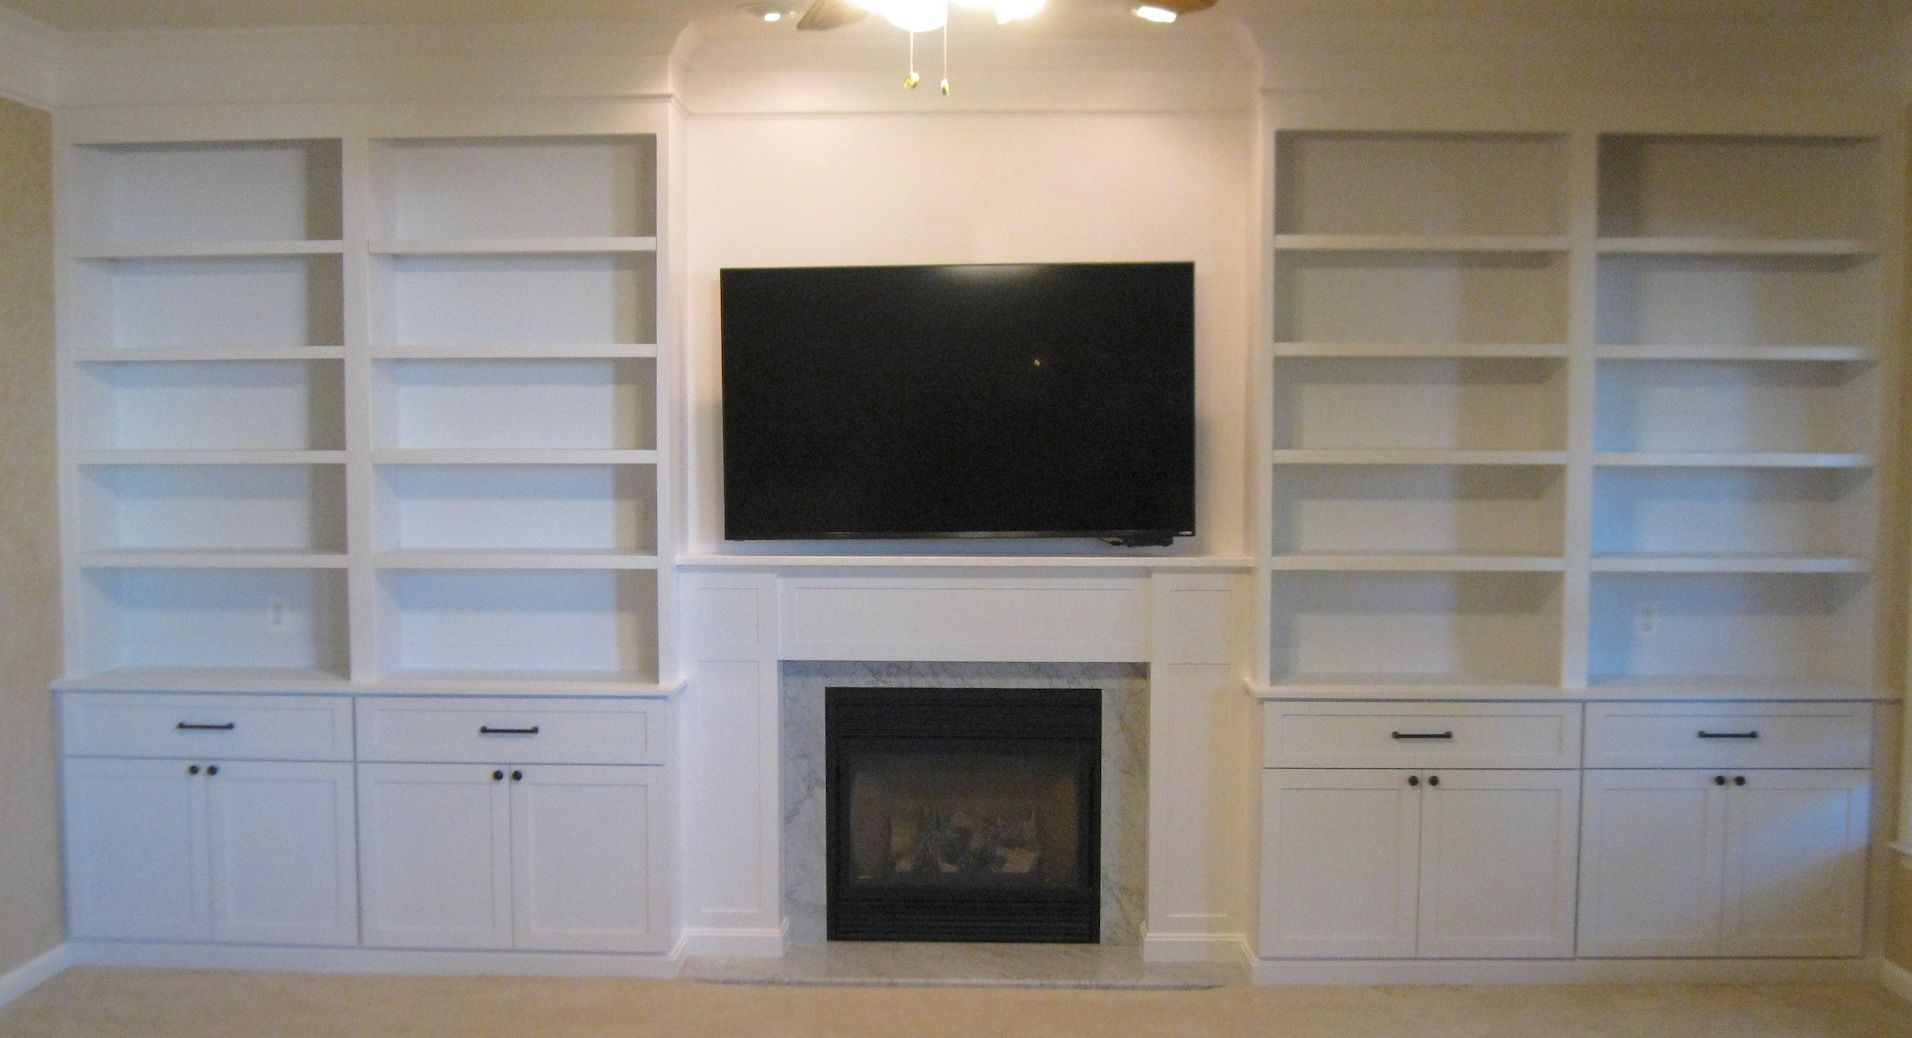 Finished Shelving with Storage and Fireplace mantel